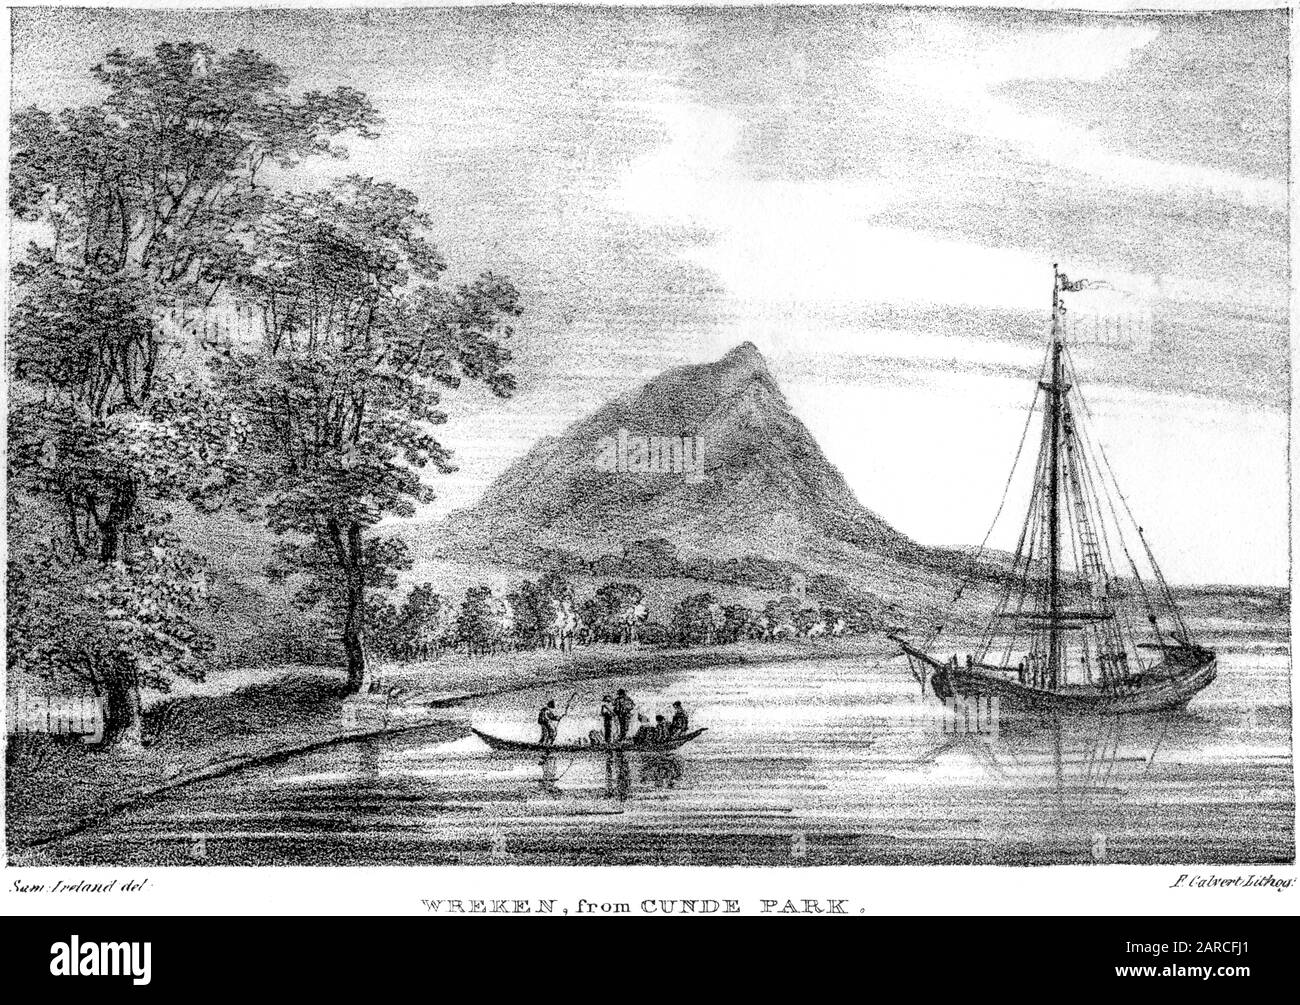 A lithograph of Wreken (The Wrekin) from Cunde (Cound) Park scanned at high resolution. from a book printed in 1824. Believed copyright free. Stock Photo